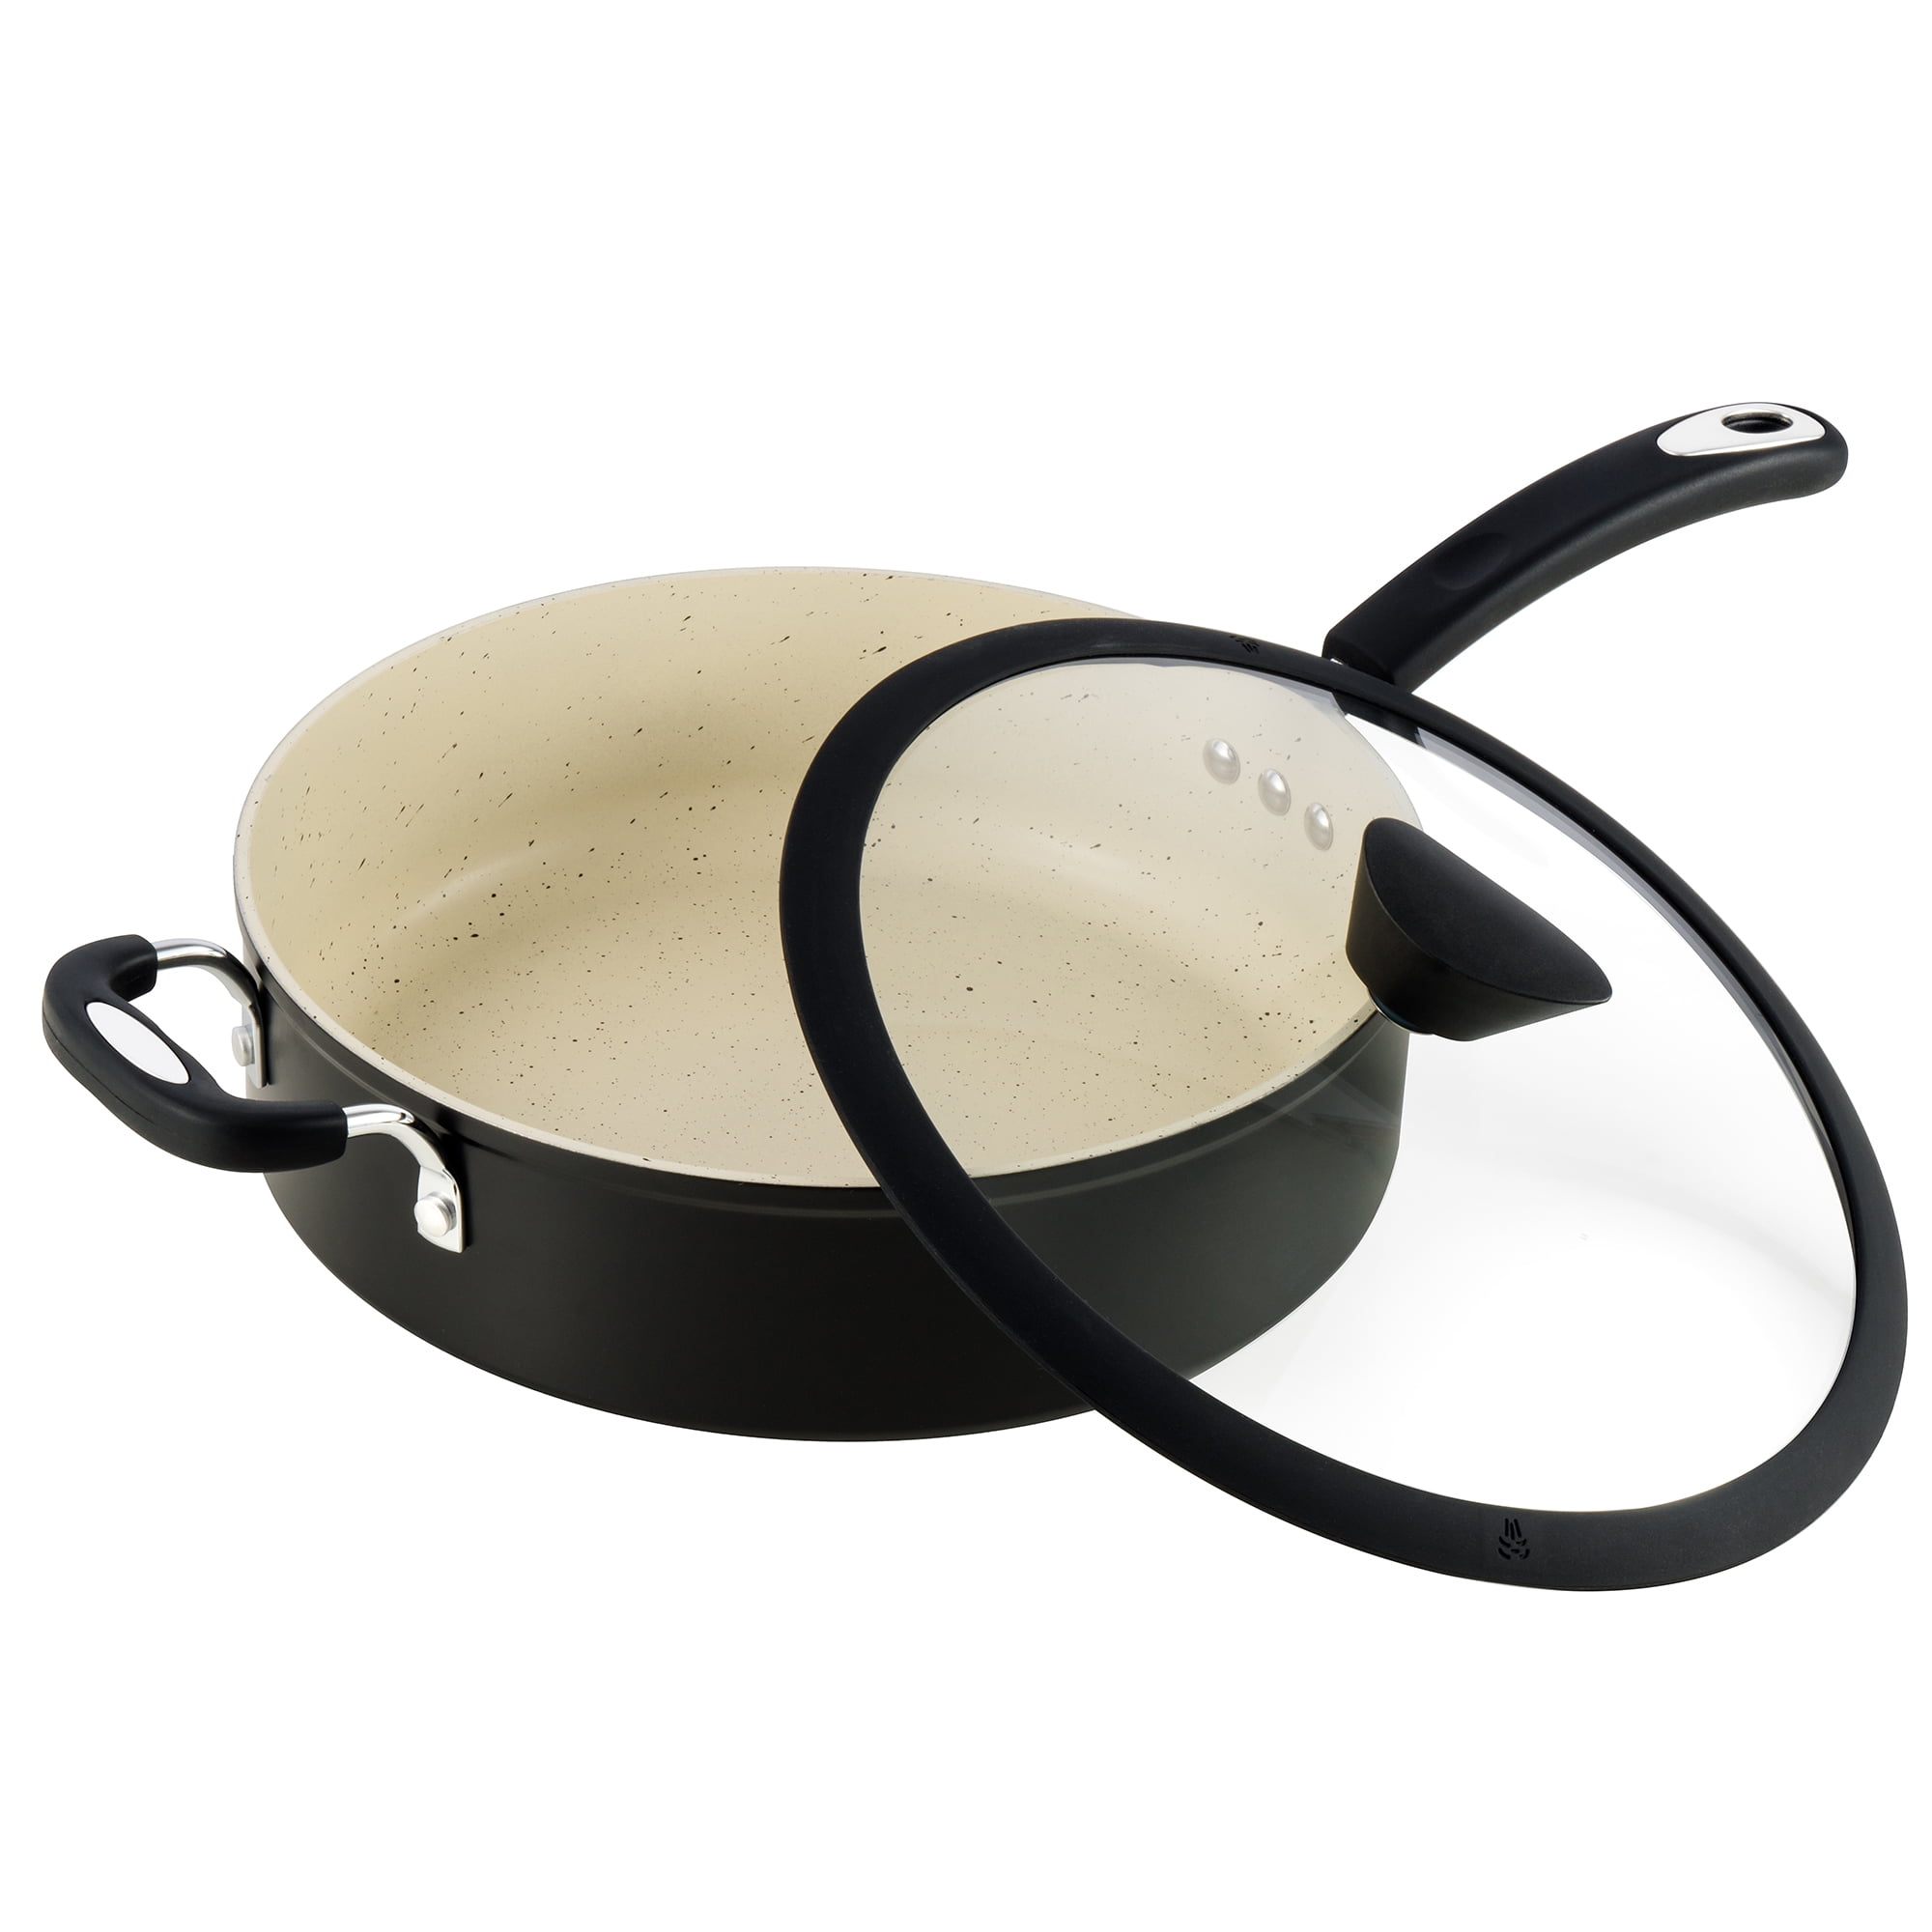 12" Stone Earth Frying Pan by Ozeri with 100% APEO & PFOA-Free Stone-Derived No 